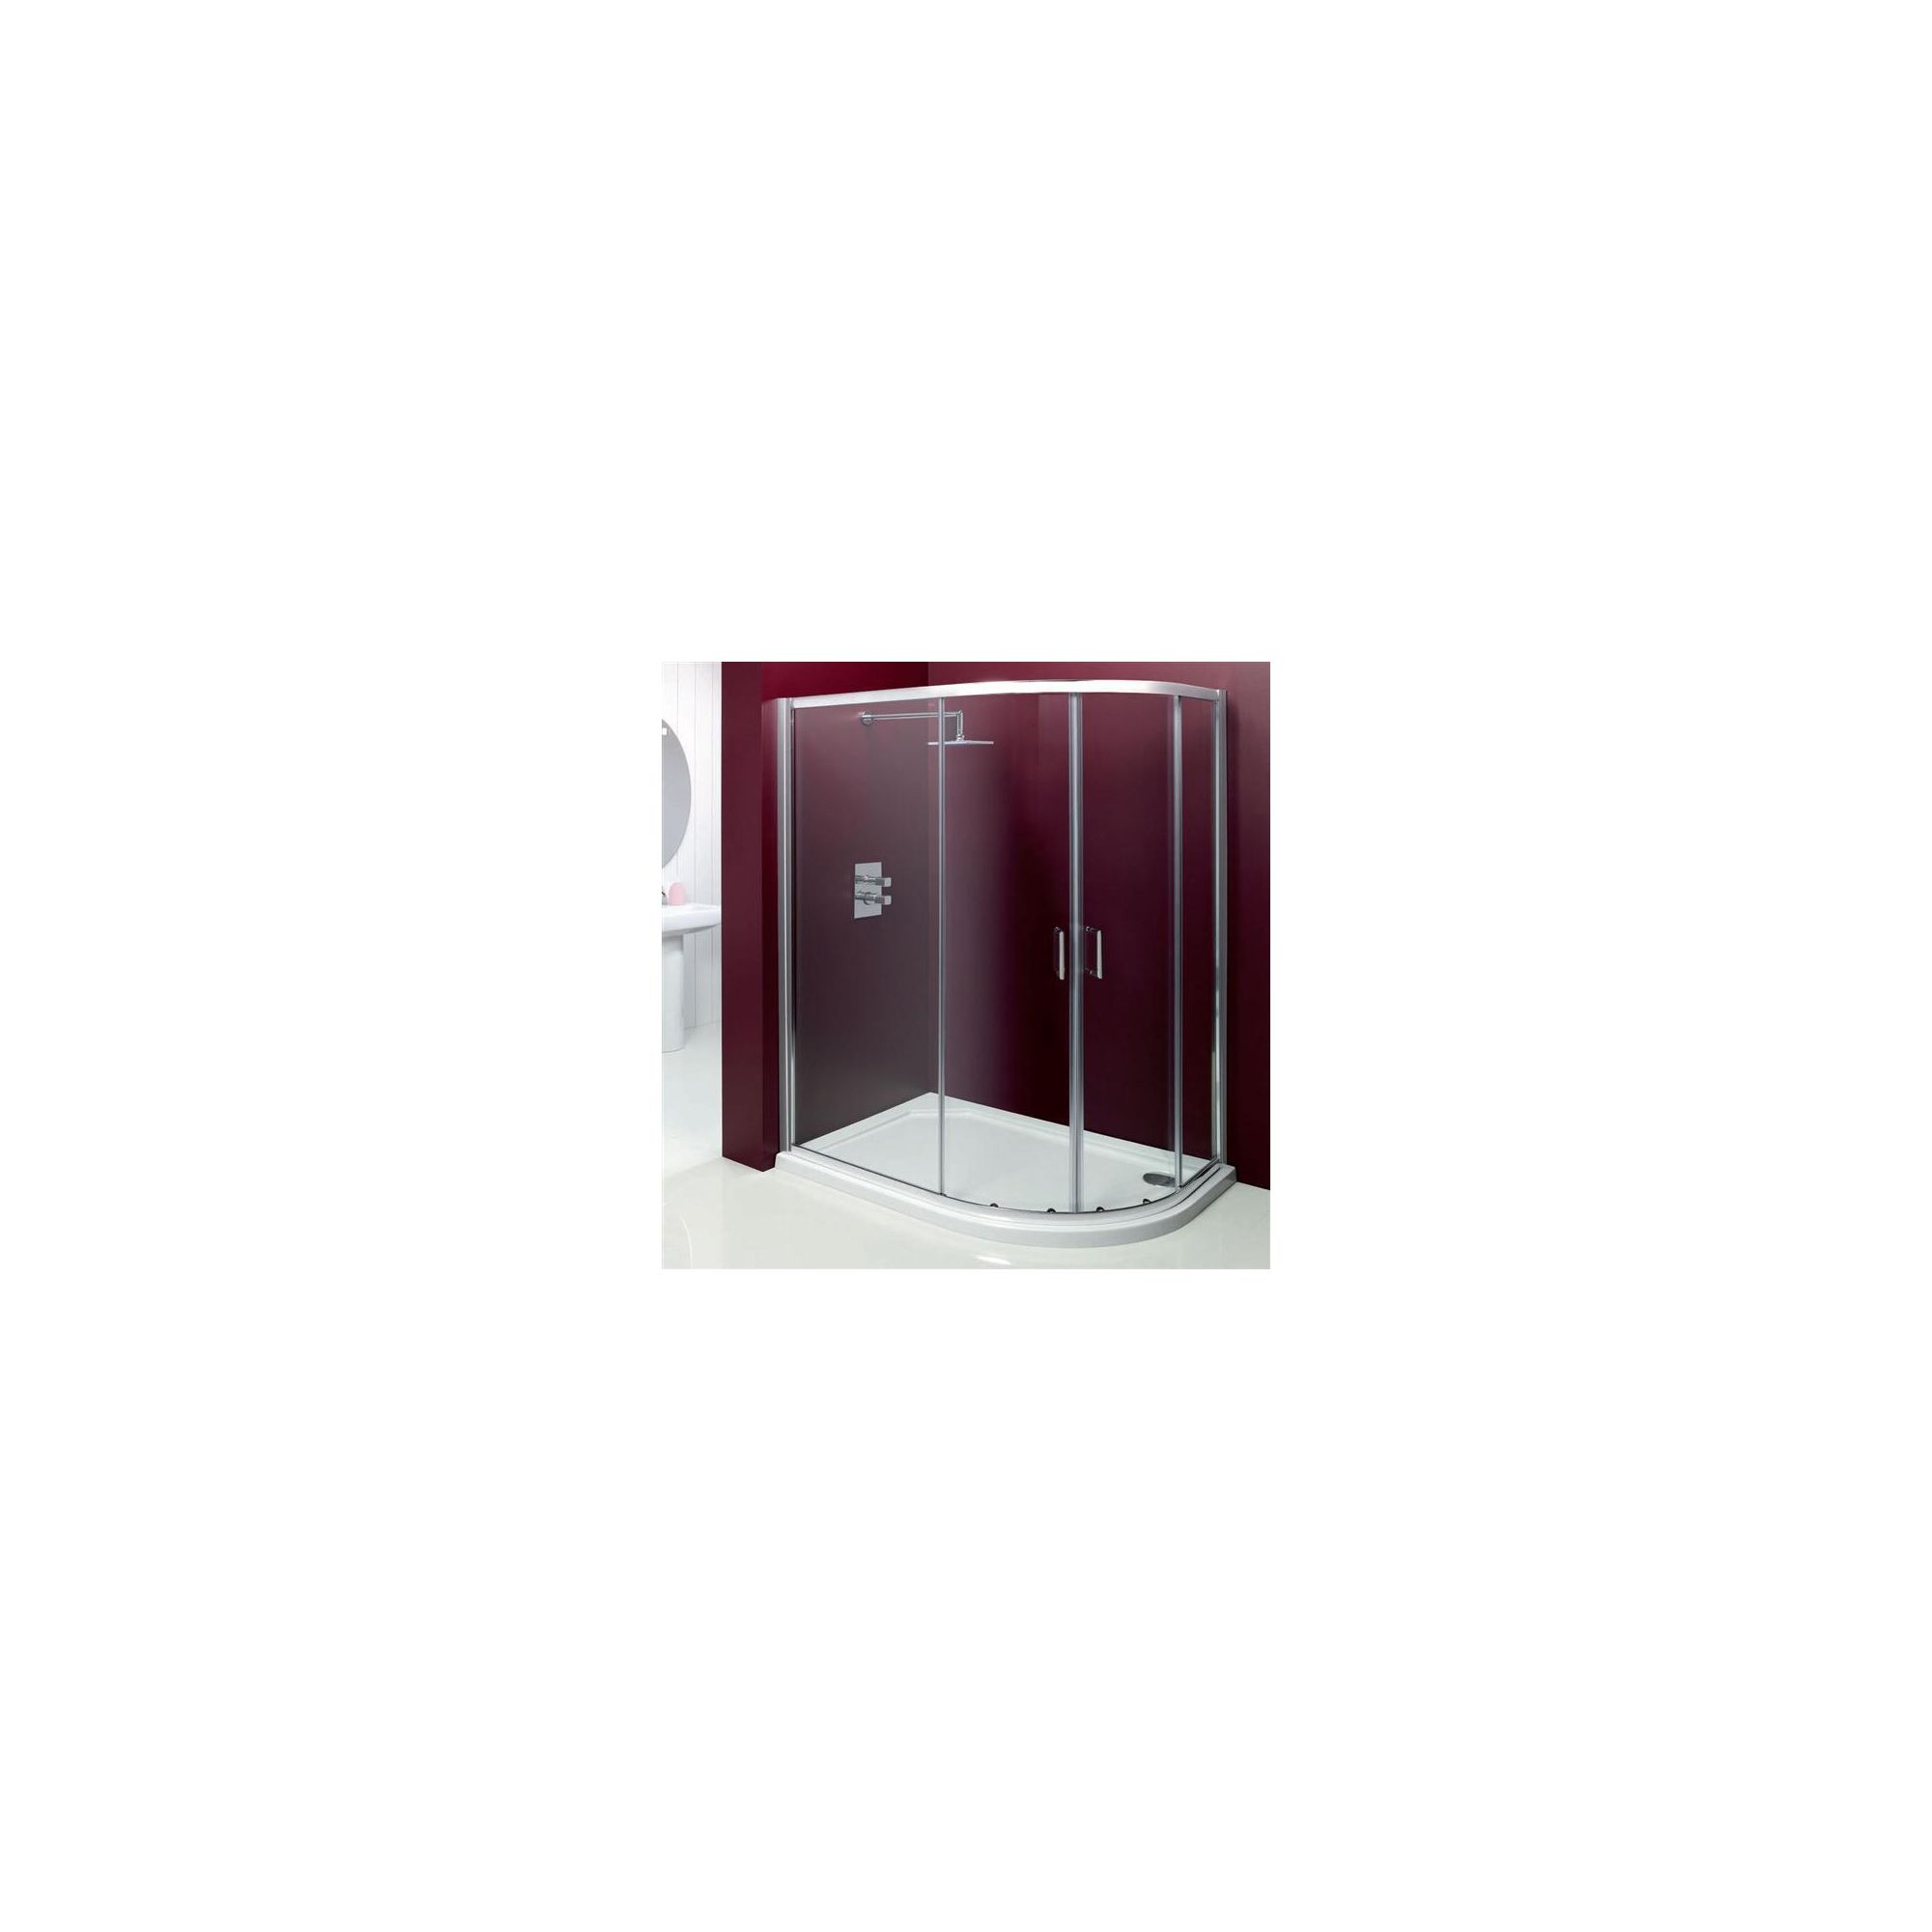 Merlyn Vivid Entree Offset Quadrant Shower Enclosure, 1200mm x 900mm, Right Handed, Low Profile Tray, 6mm Glass at Tesco Direct